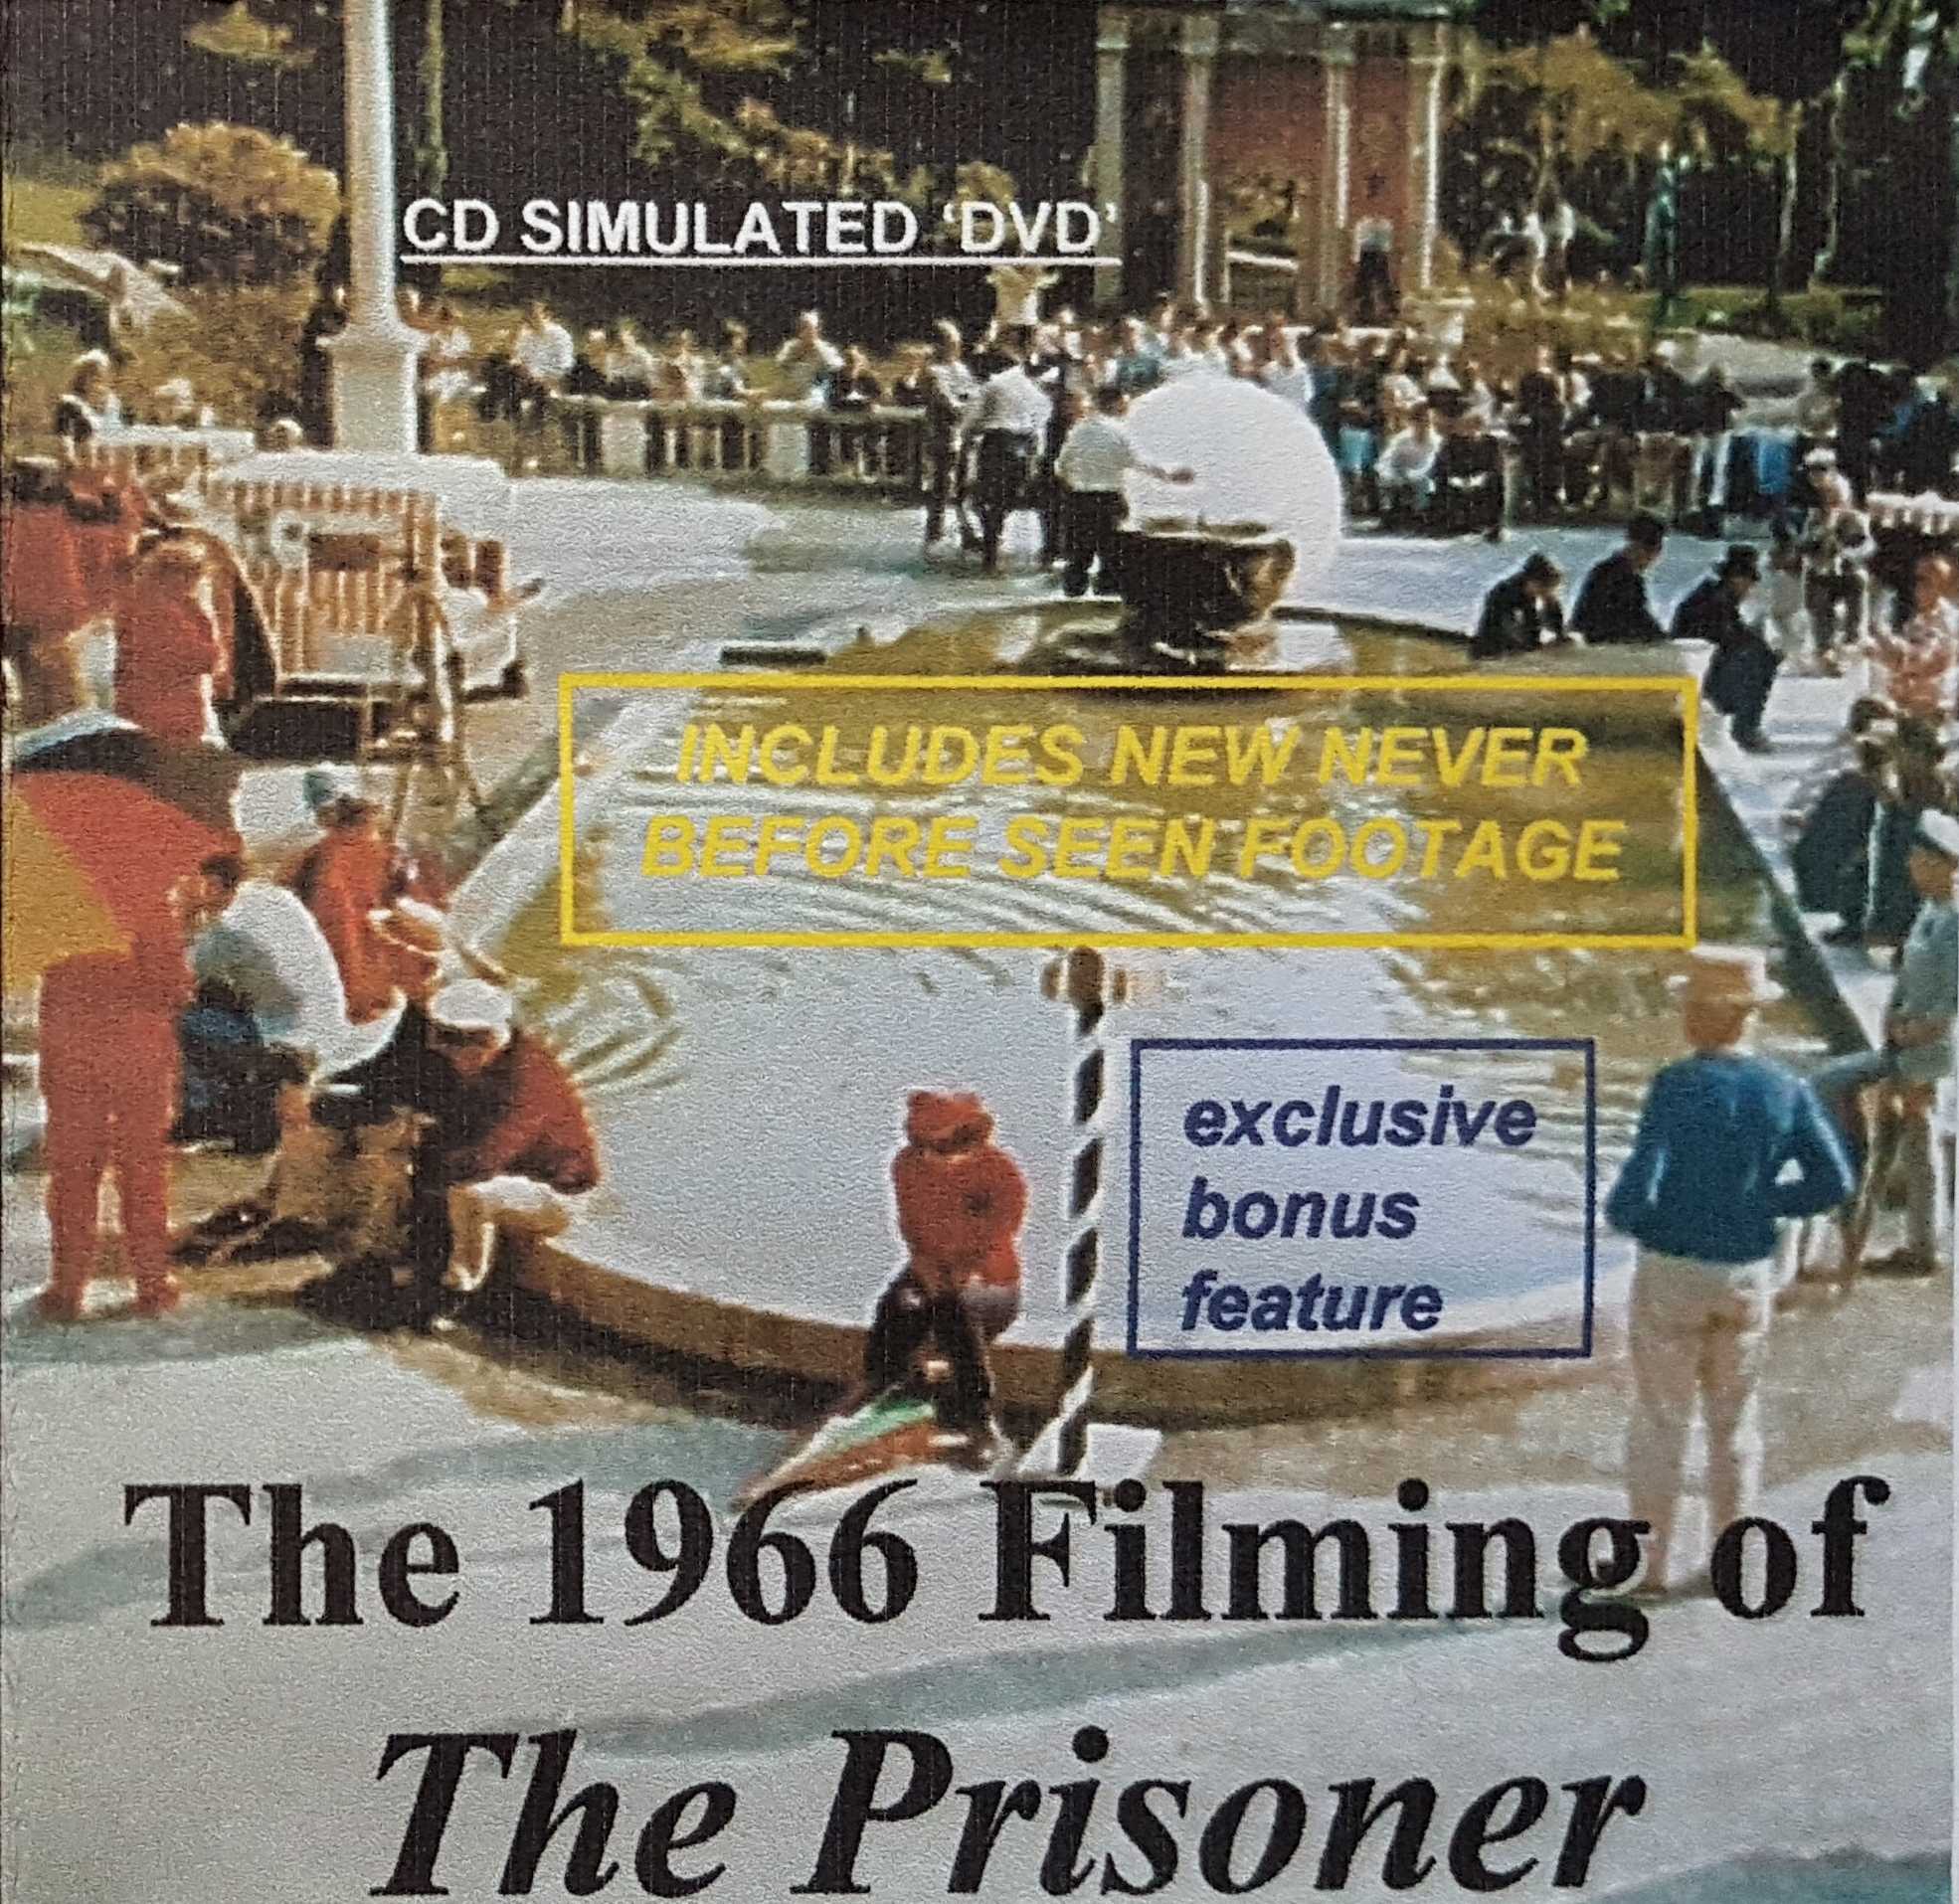 Picture of The 1966 filming of the Prisoner by artist Unknown from ITV, Channel 4 and Channel 5 dvds library